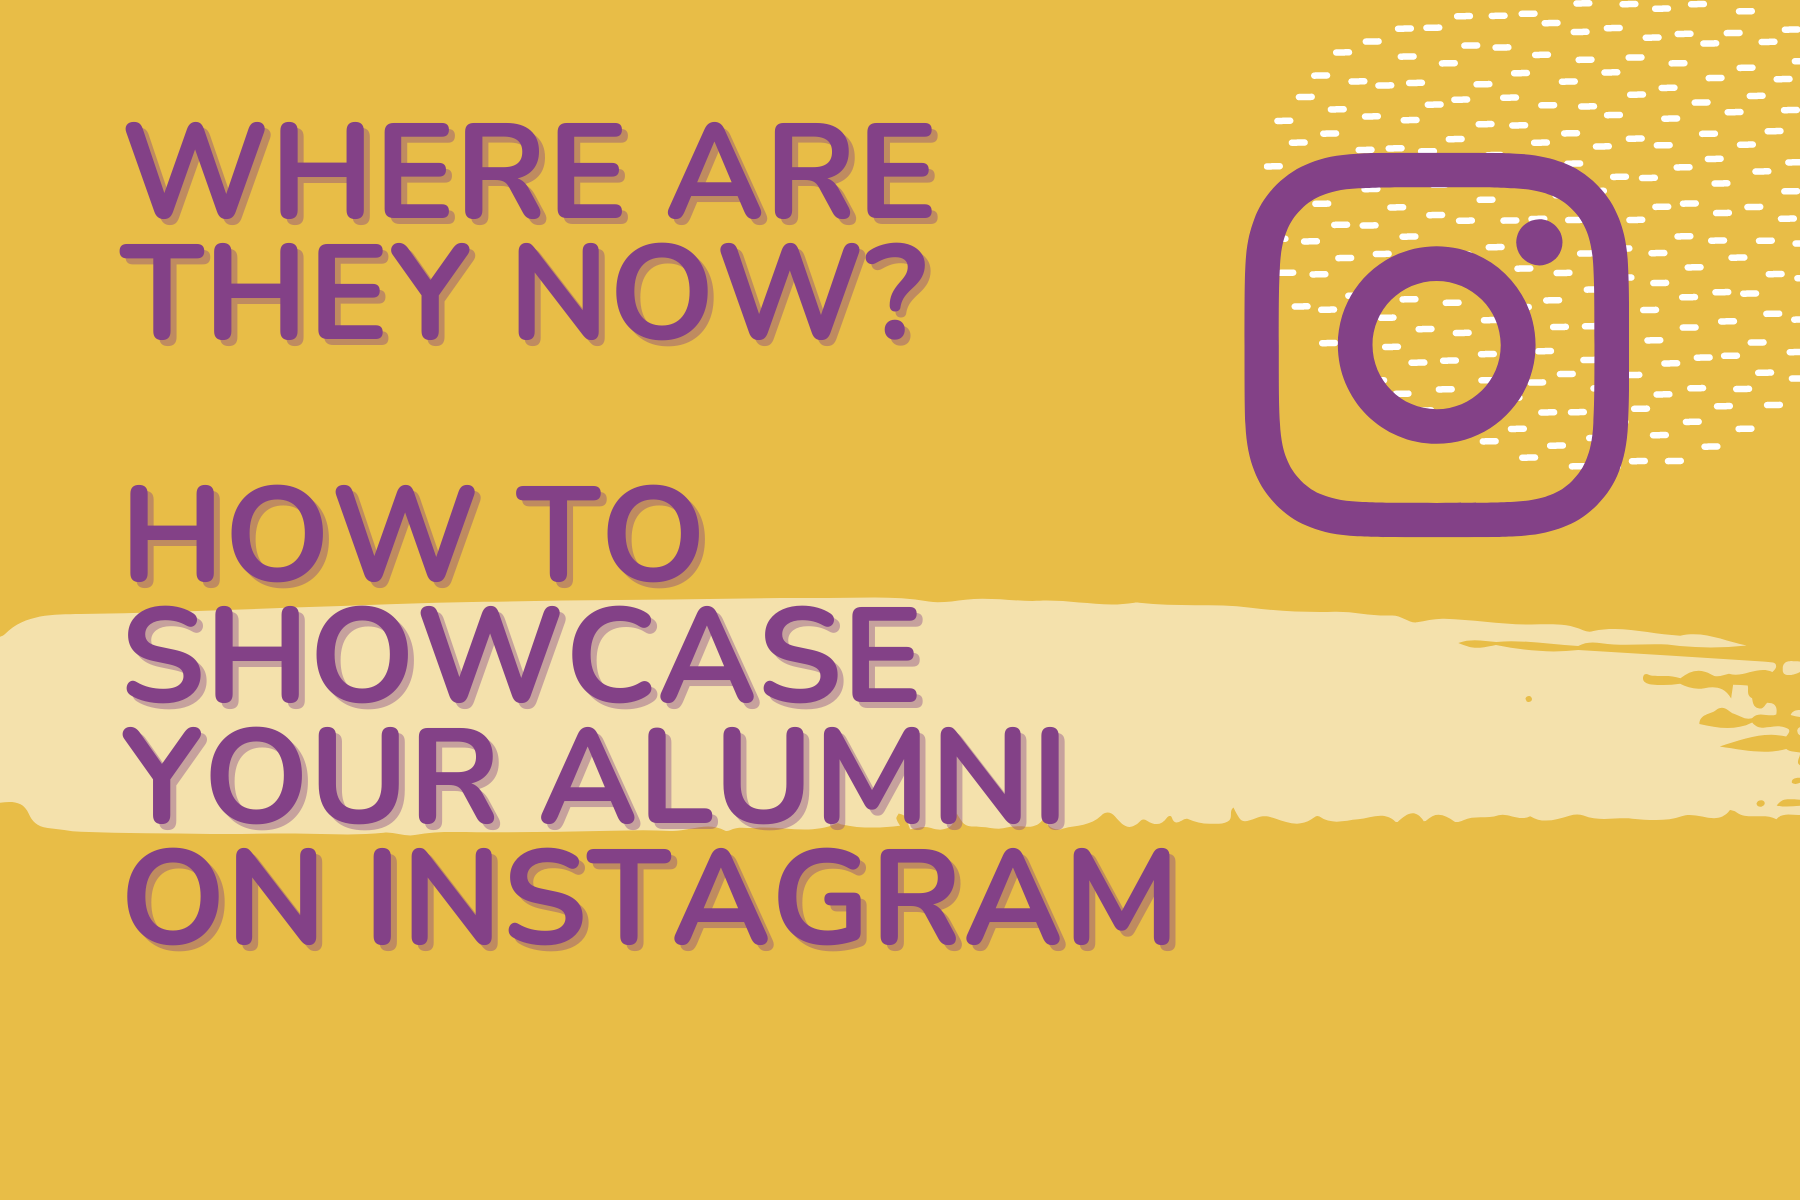 Where are they now? How to showcase your Alumni on Instagram